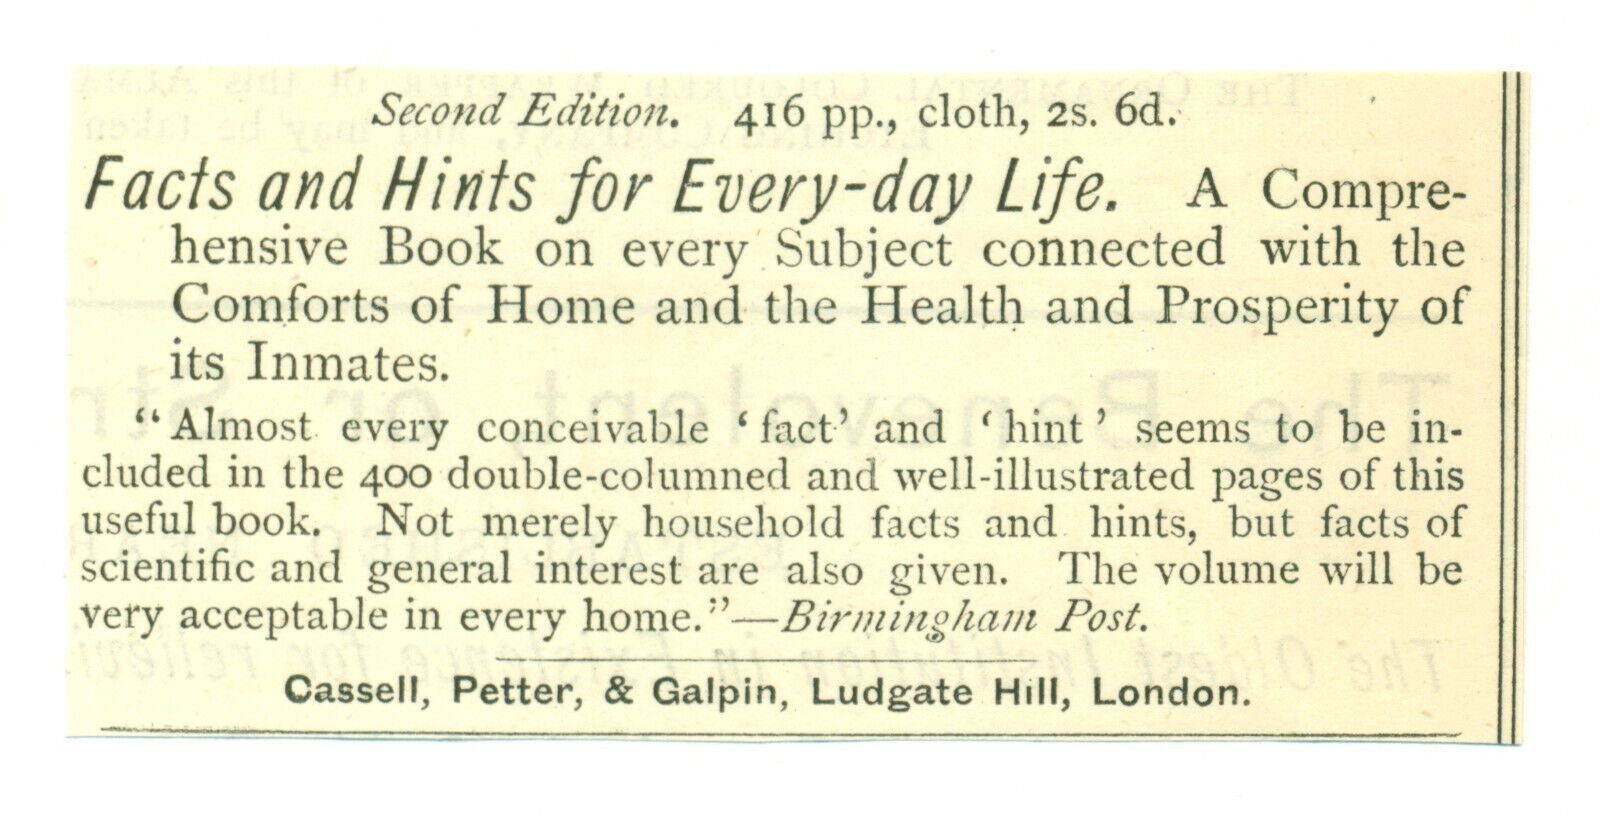 1874 FACTS AND HINTS FOR EVERY-DAY LIFE, 416 pg. book Vintage Print Ad SV2.